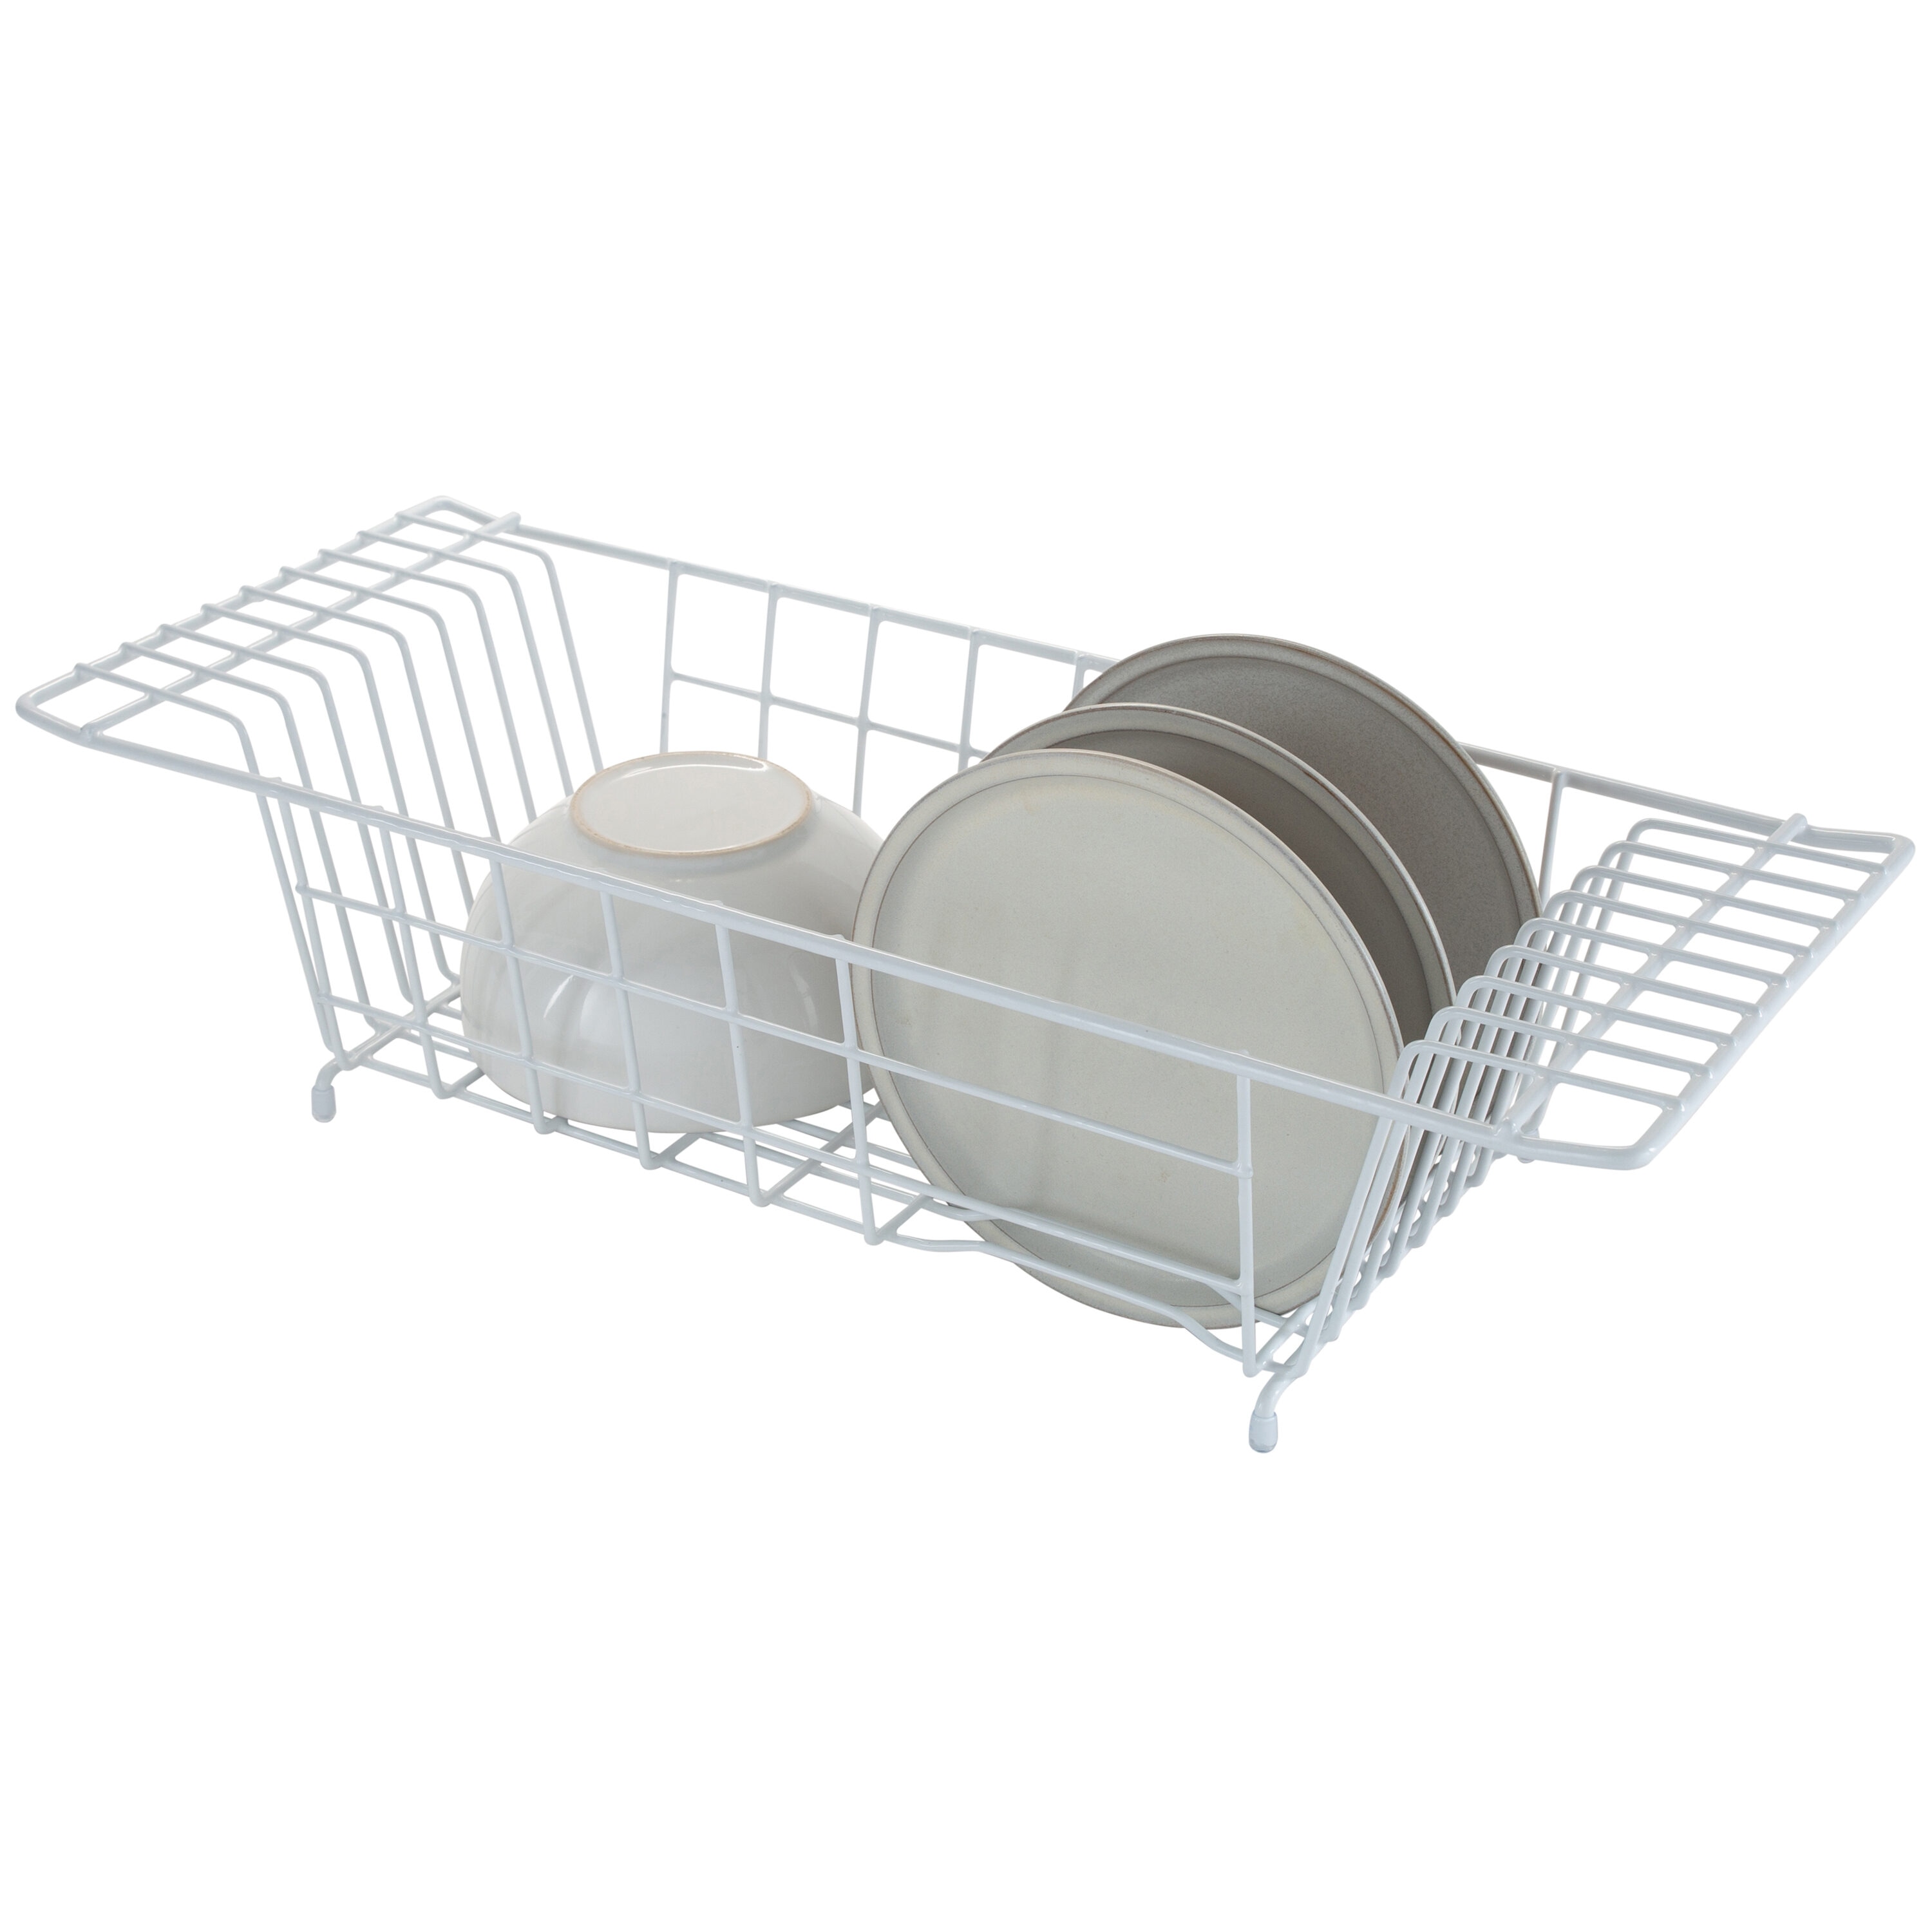 Kitchen Details Infinity Link Dish Rack With Cutlery Holder, Rust